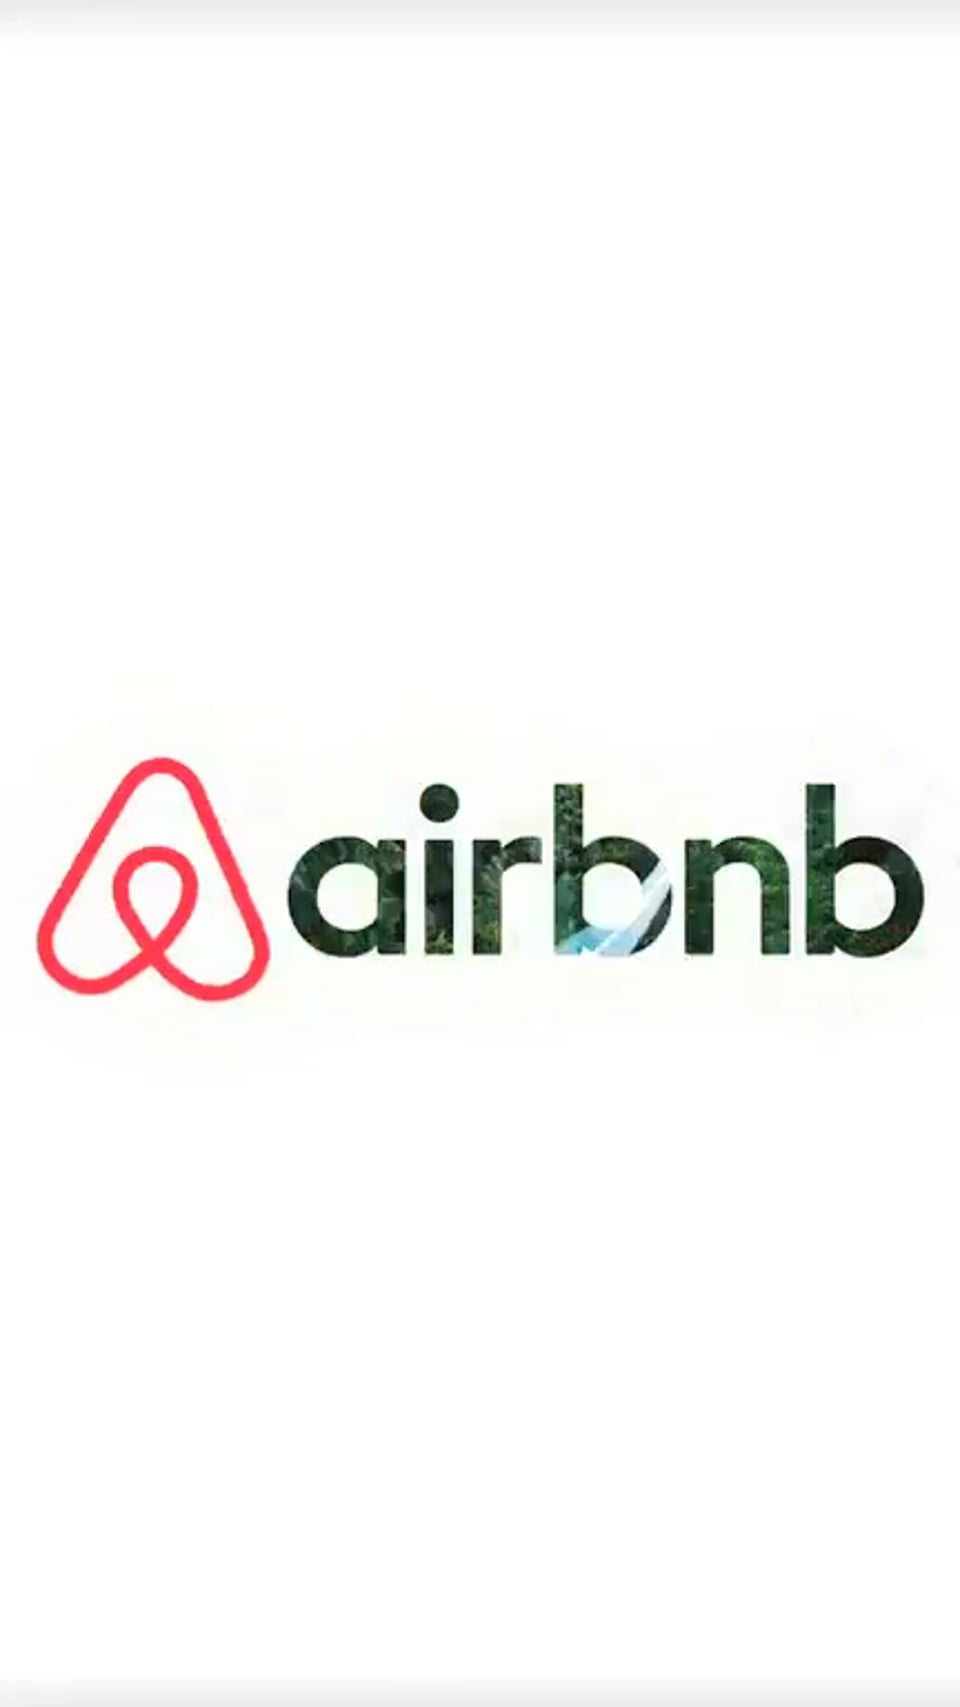 airbnb vertical campaign